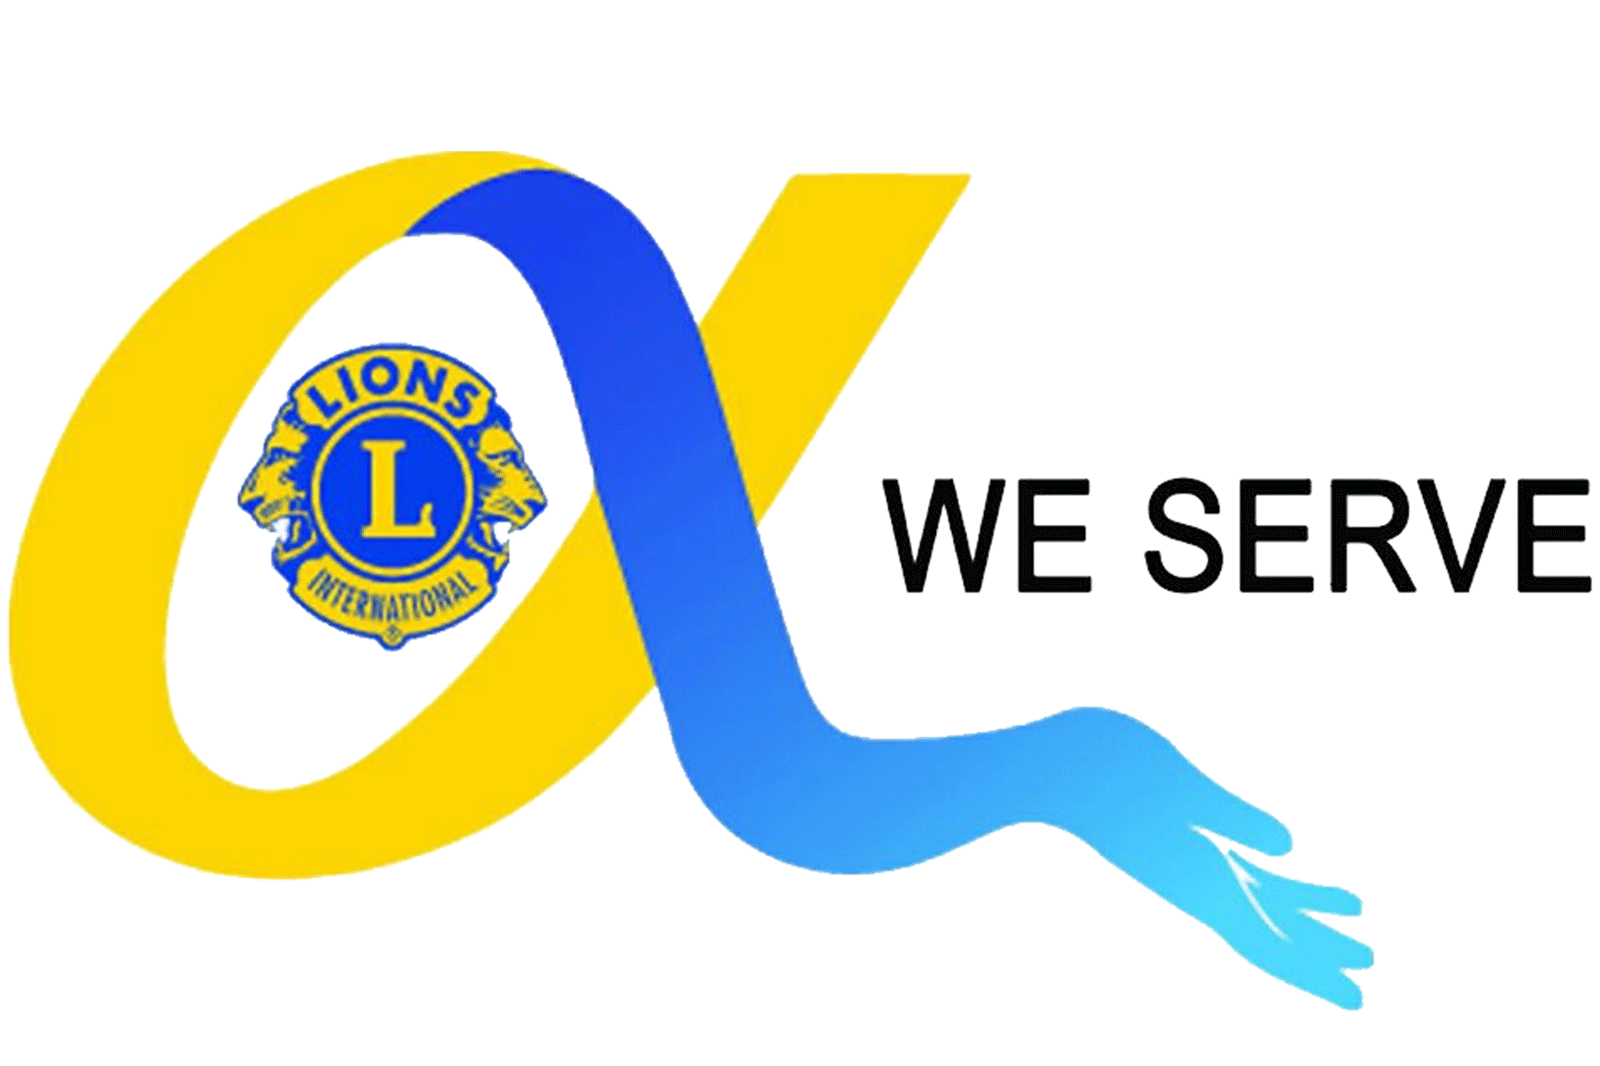 Lions Club of Payyanur: Donated to Students' treatment fund in